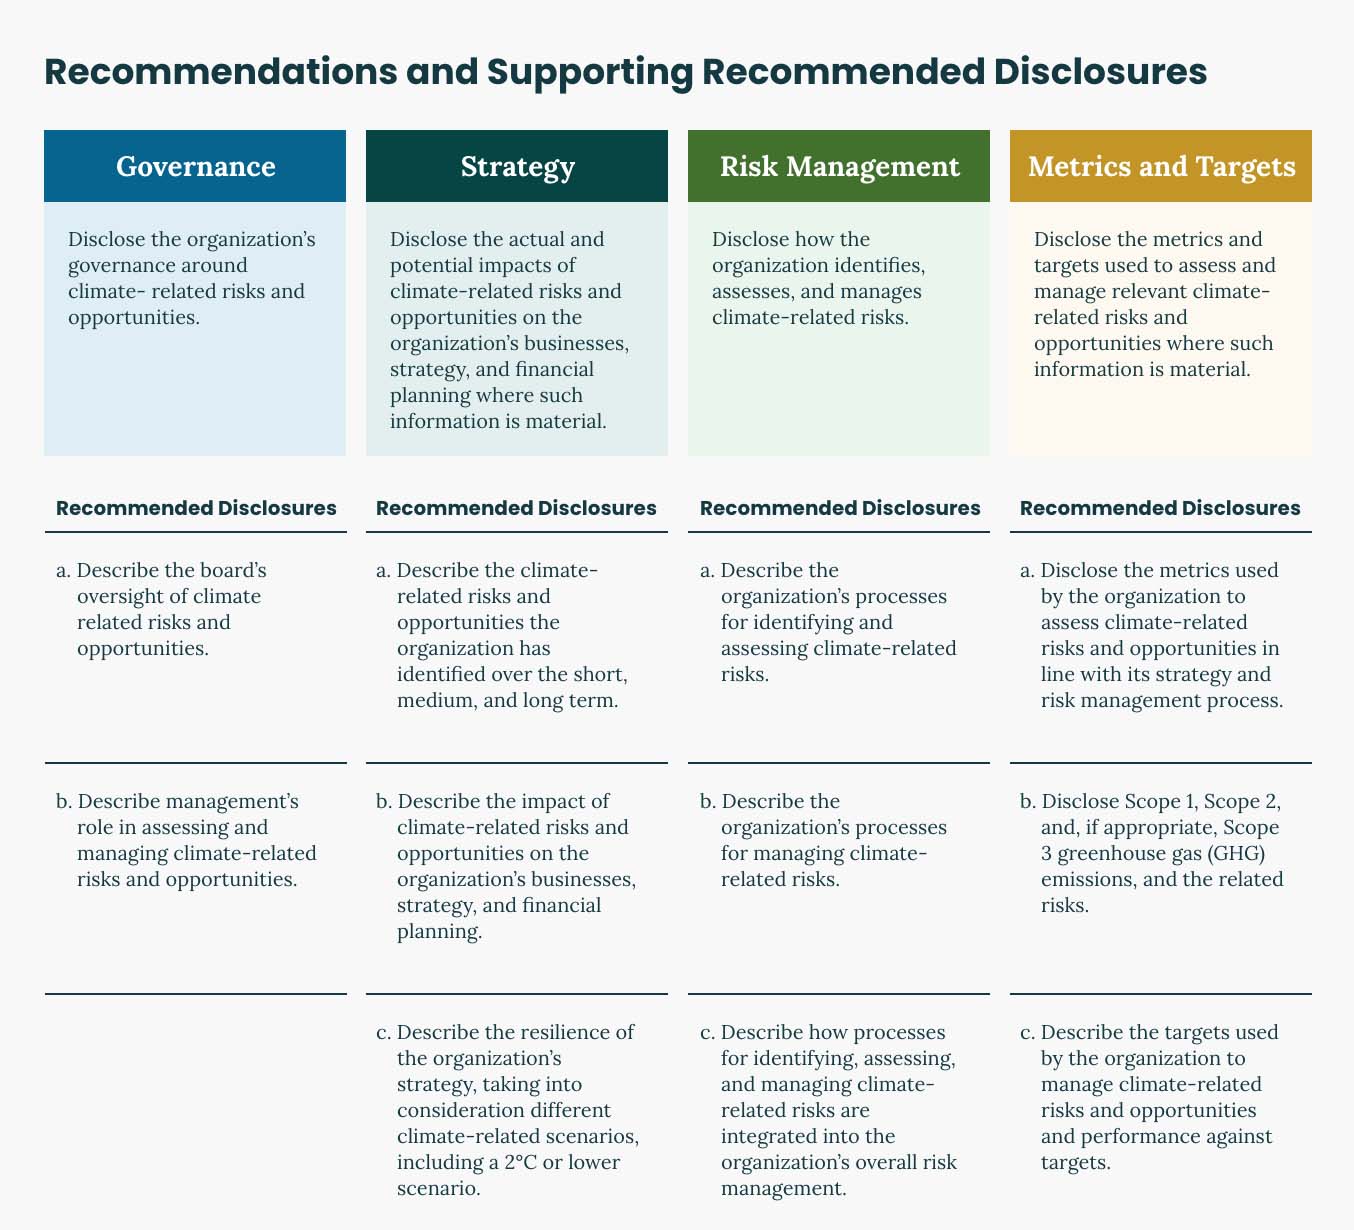 Supporting Recommended Disclosures per TCFD Key Theme